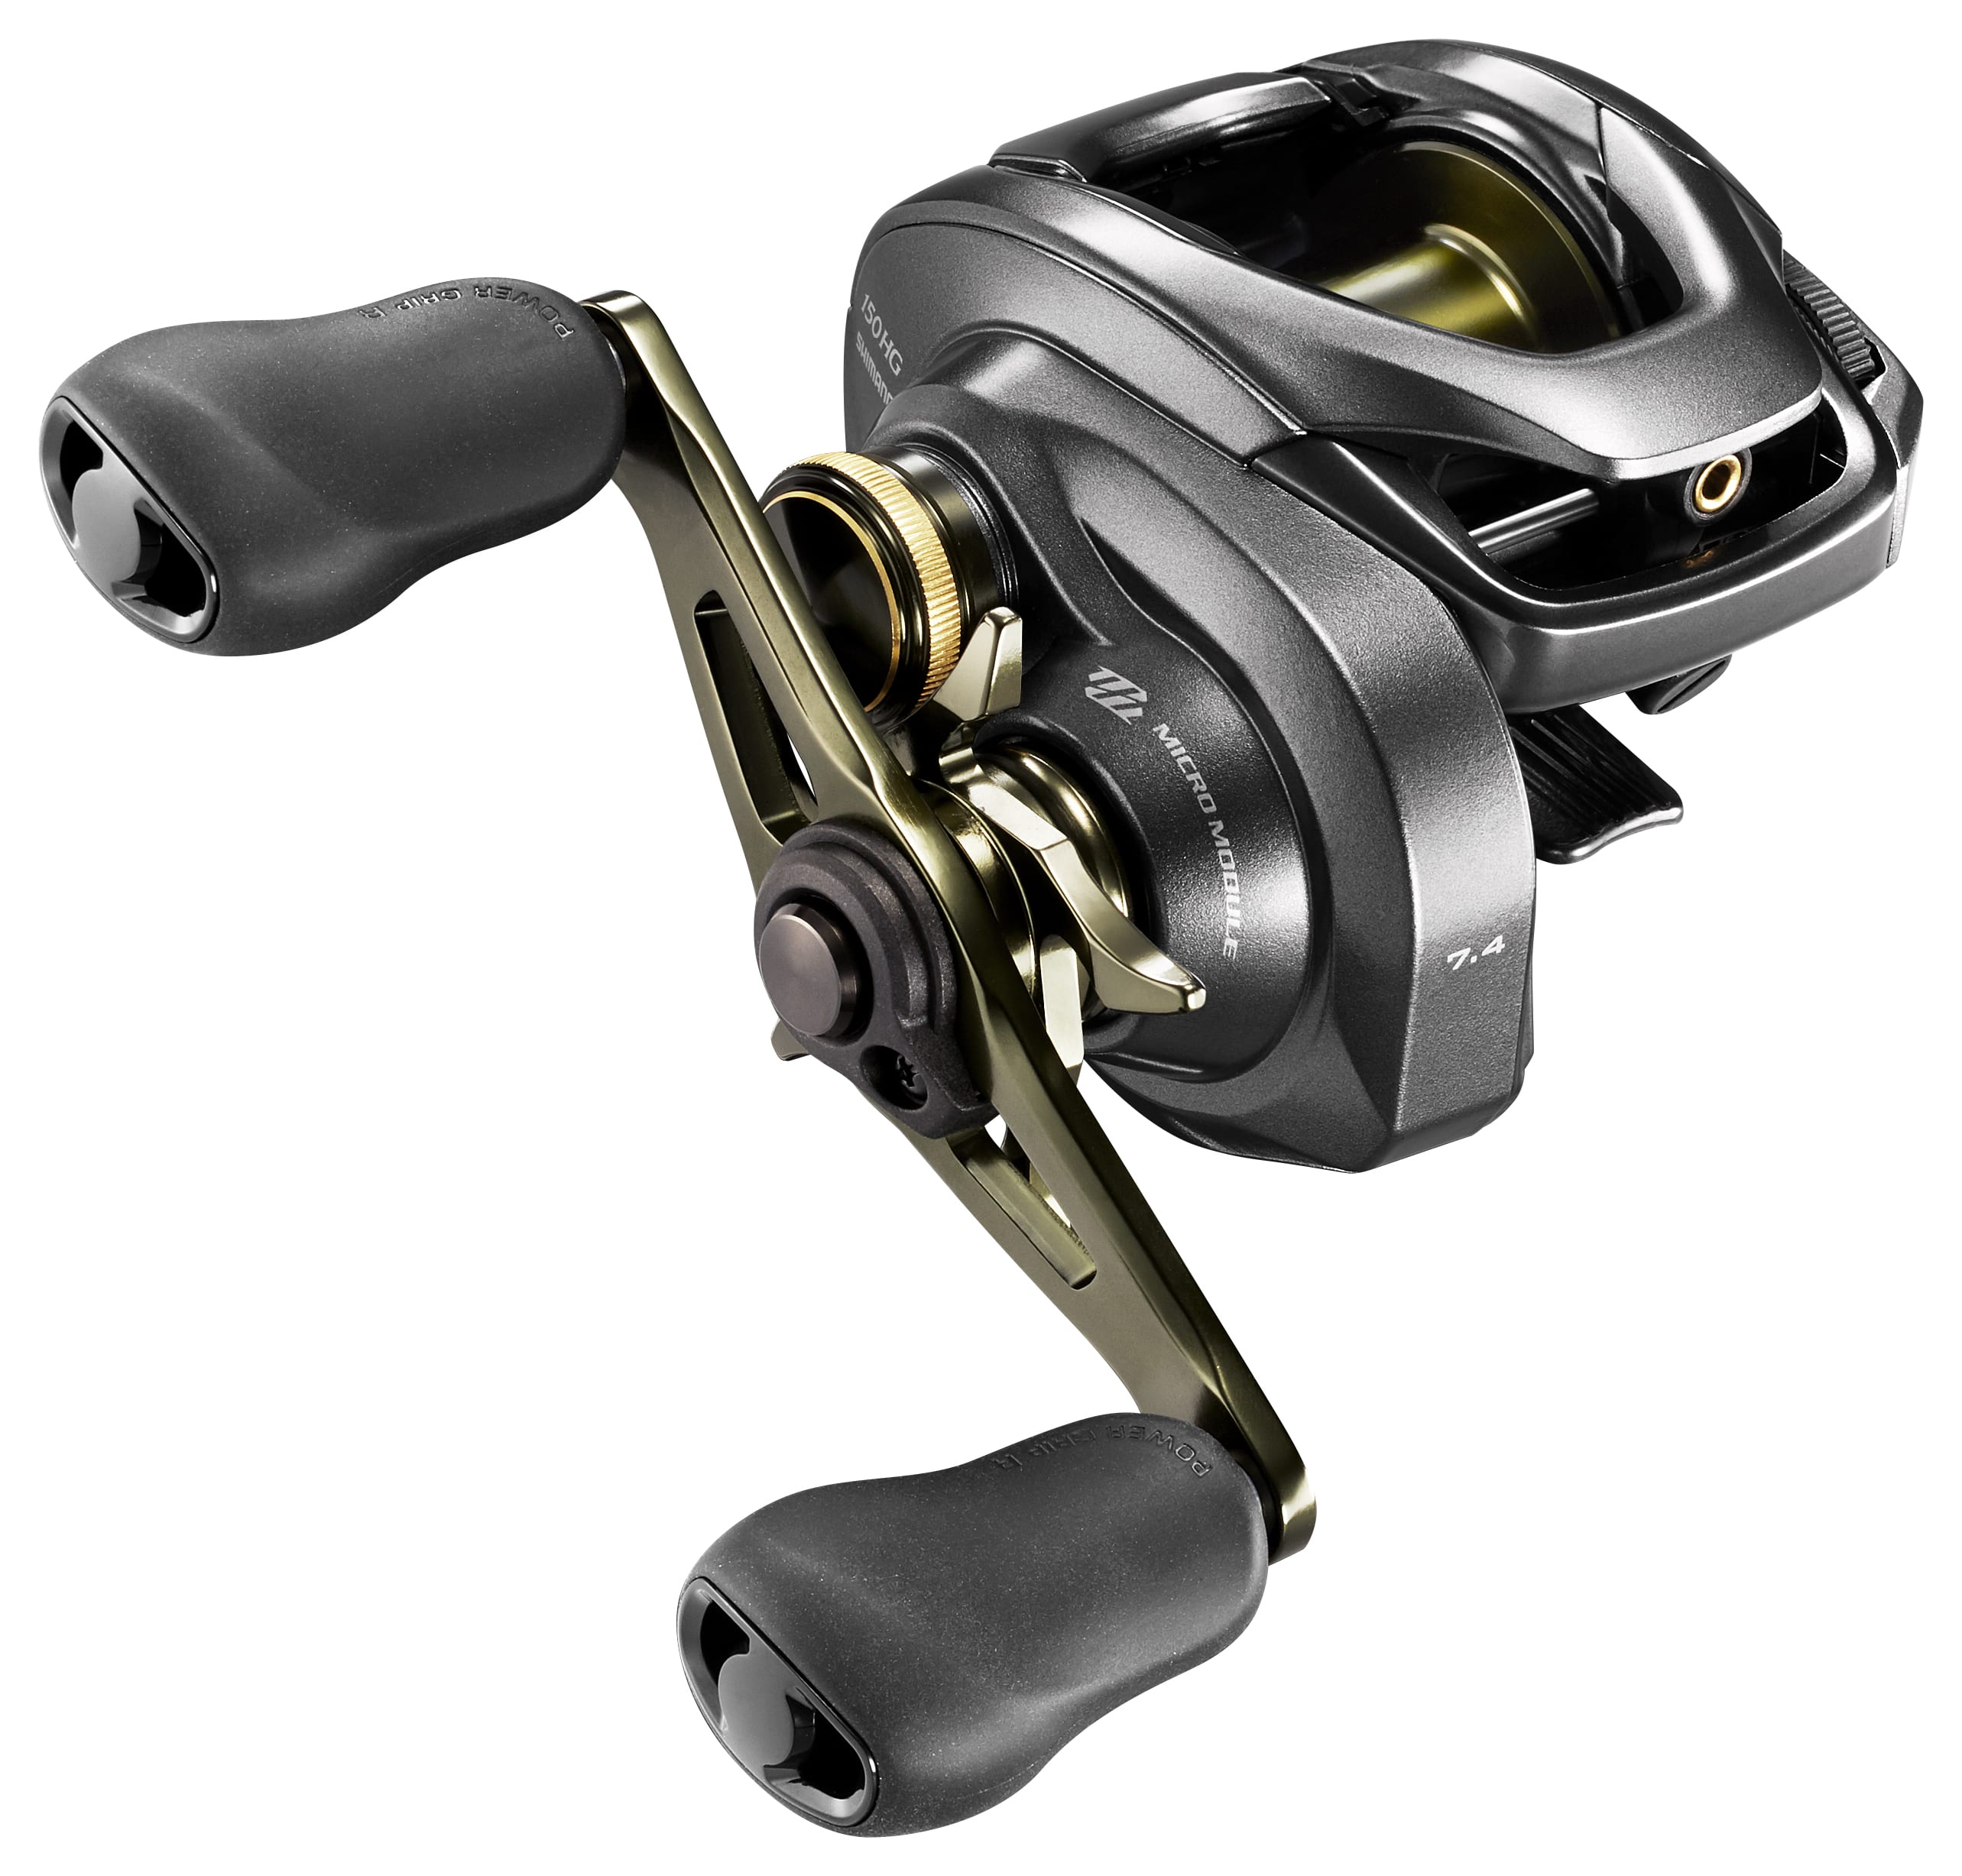 Shimano wins Best Freshwater Reel with Curado DC - Texas Hunting & Fishing